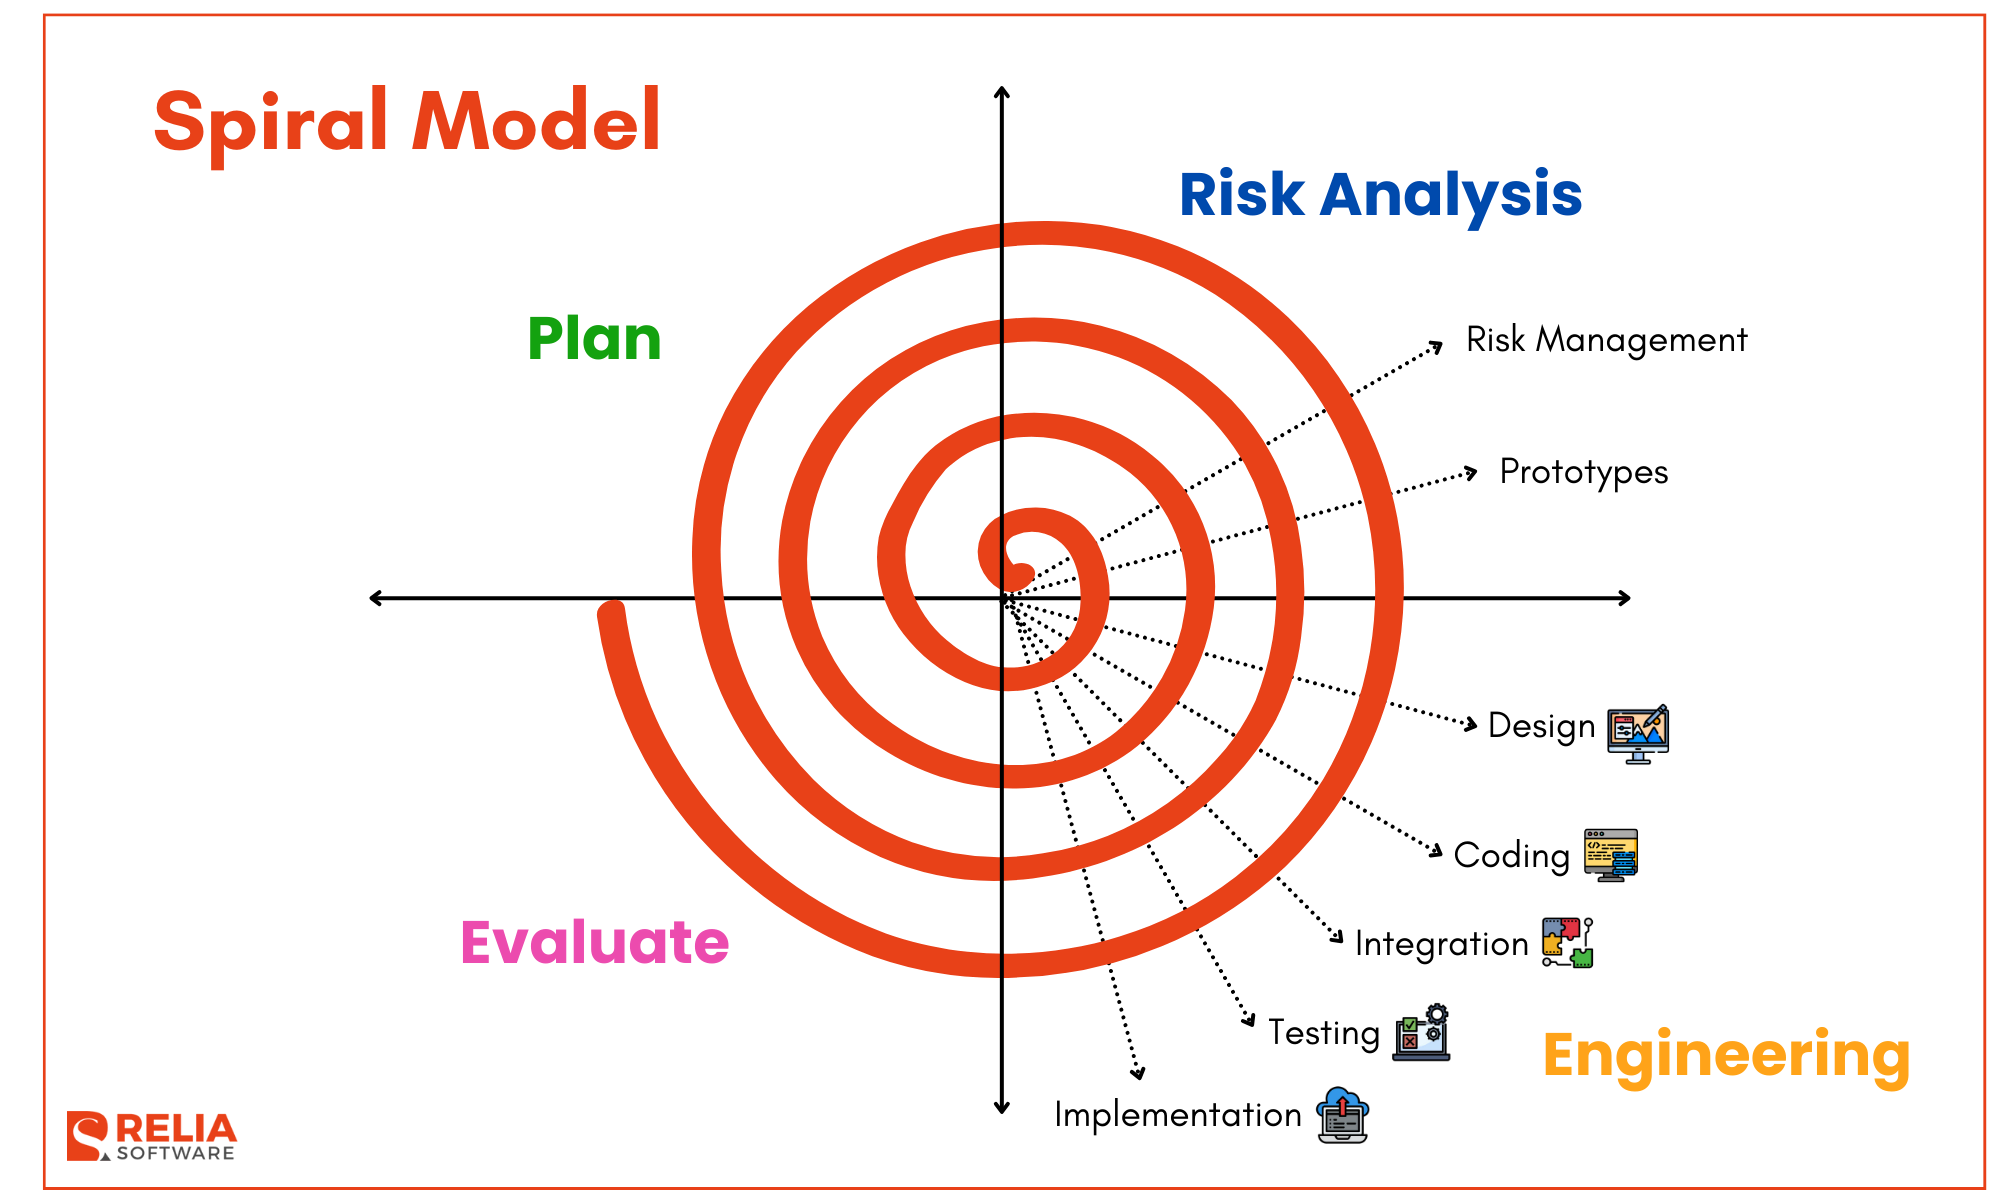 spiral-model.The Spiral Model is well-suited for large and complex projects with high-risk factors and need for early user feedback.